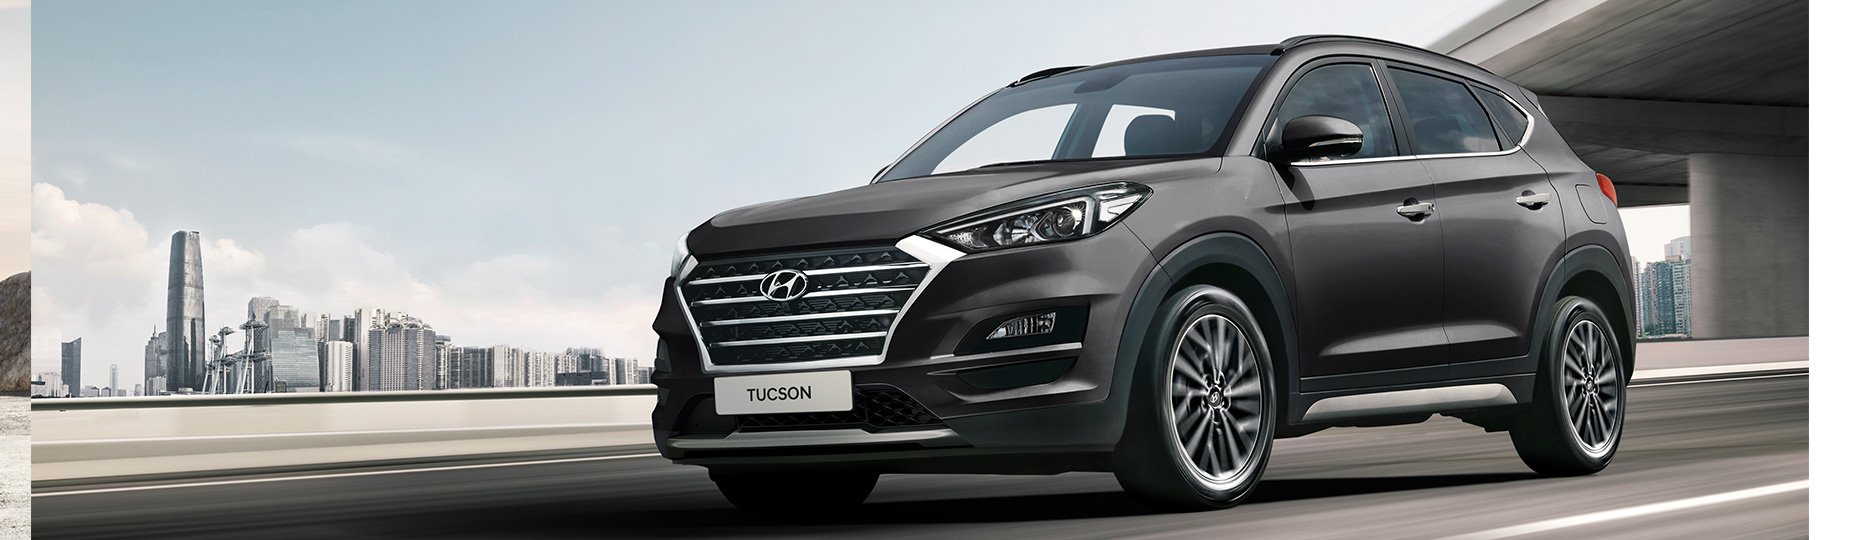 How Much Does a Hyundai Car Insurance Cost in 11?